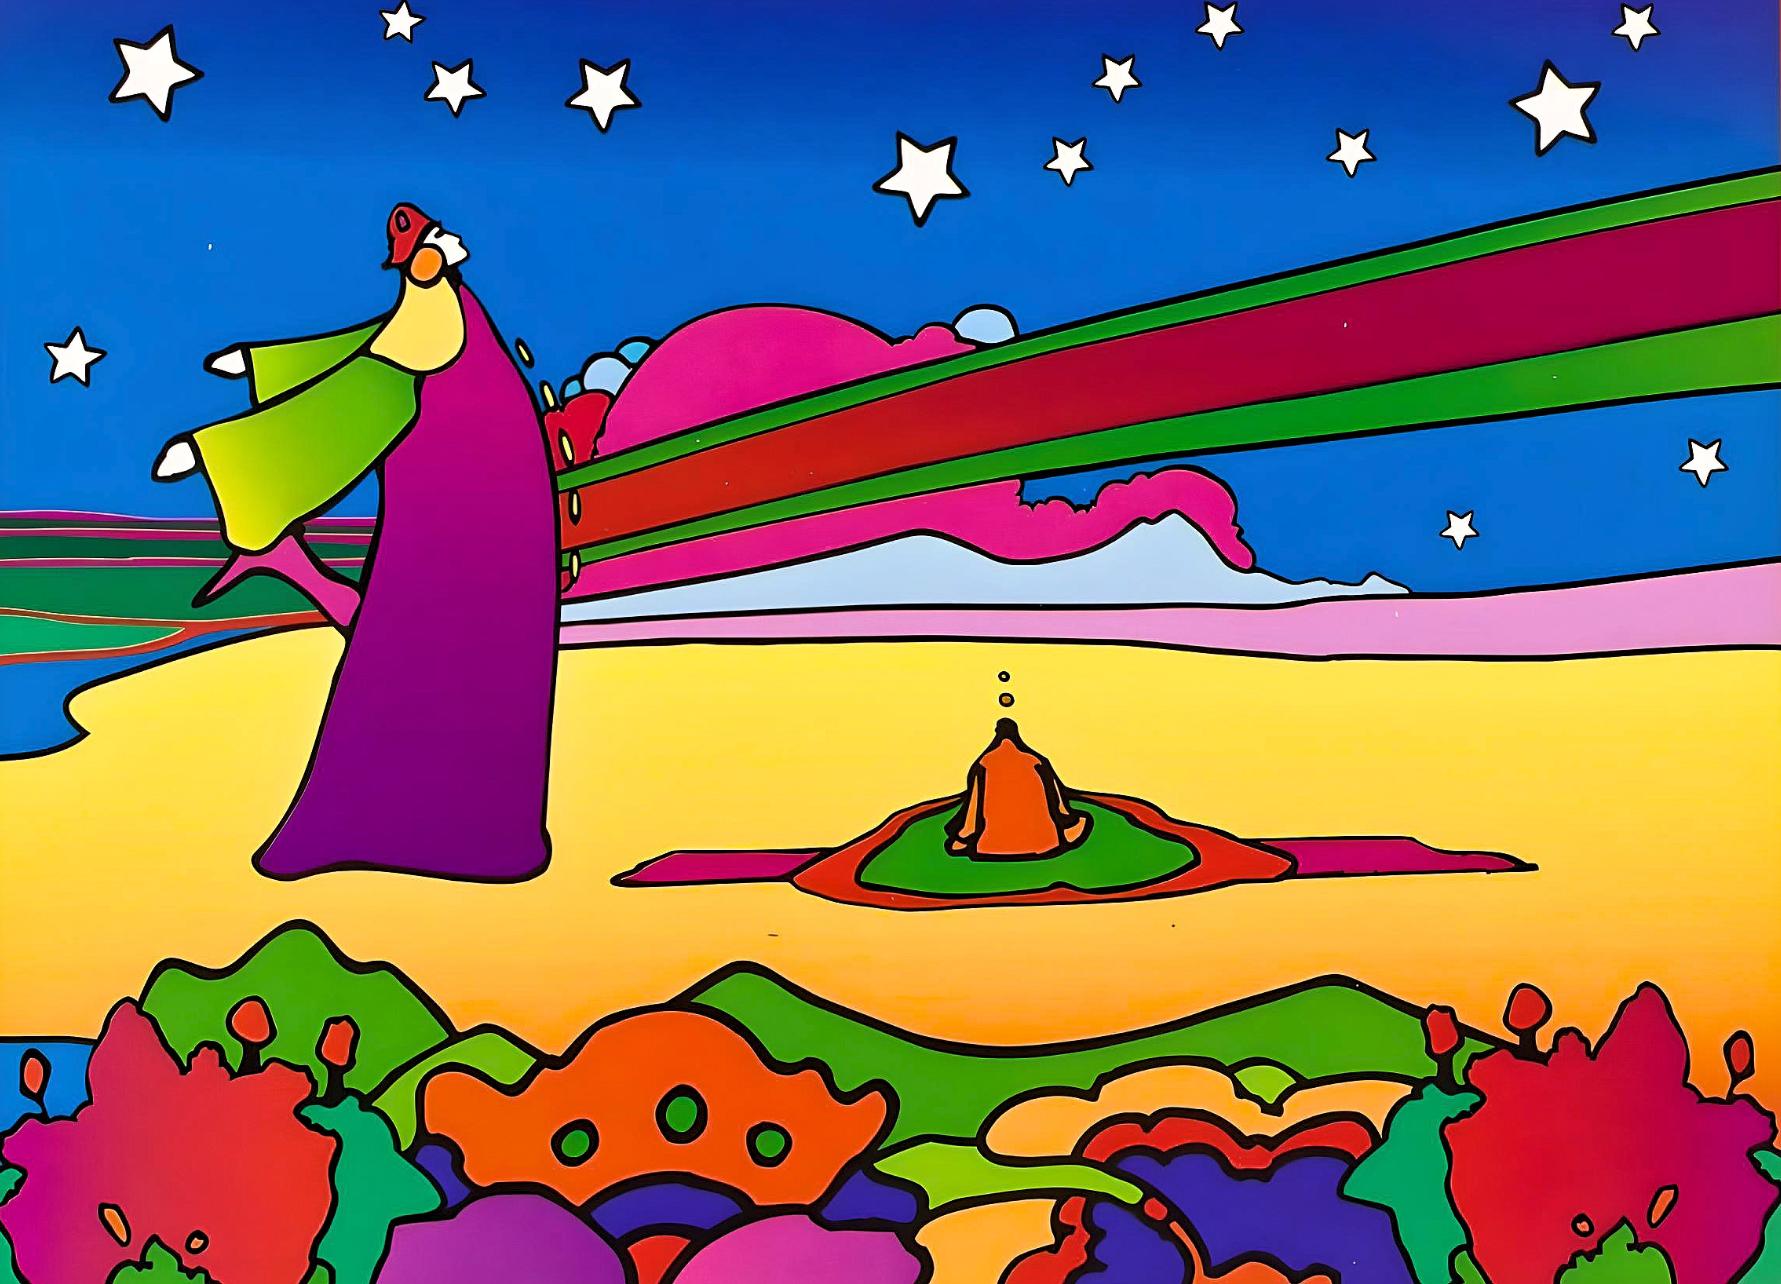 Artist: Peter Max (1937)
Title: Two Cosmic Sages Ver. II
Year: 2001
Edition: 500/500, plus proofs
Medium: Lithograph on archival paper
Size: 9 x 11 inches
Condition: Excellent
Inscription: Signed and numbered by the artist.
Notes: Published by Via